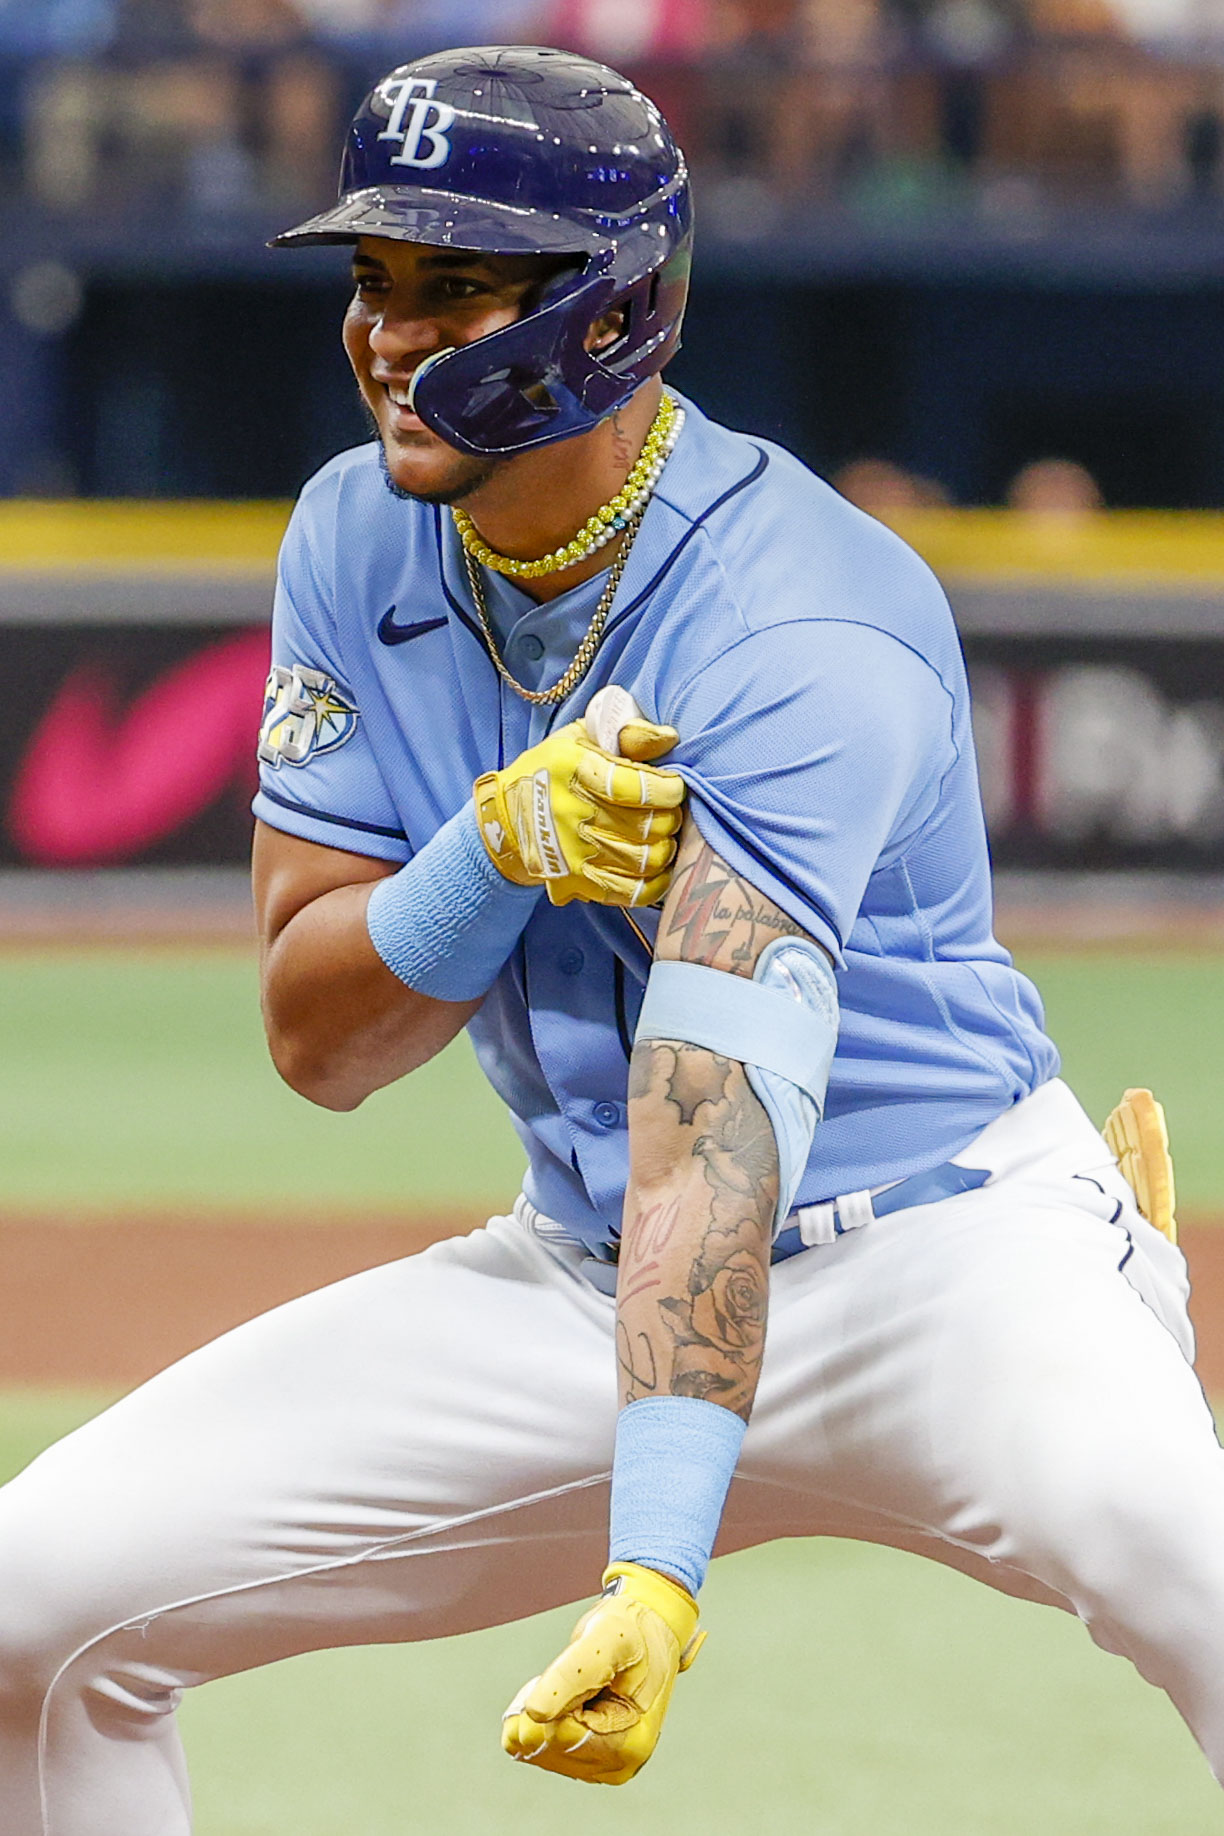 Rays' Jose Siri, winter ball's Mike Trout, is uniquely special himself